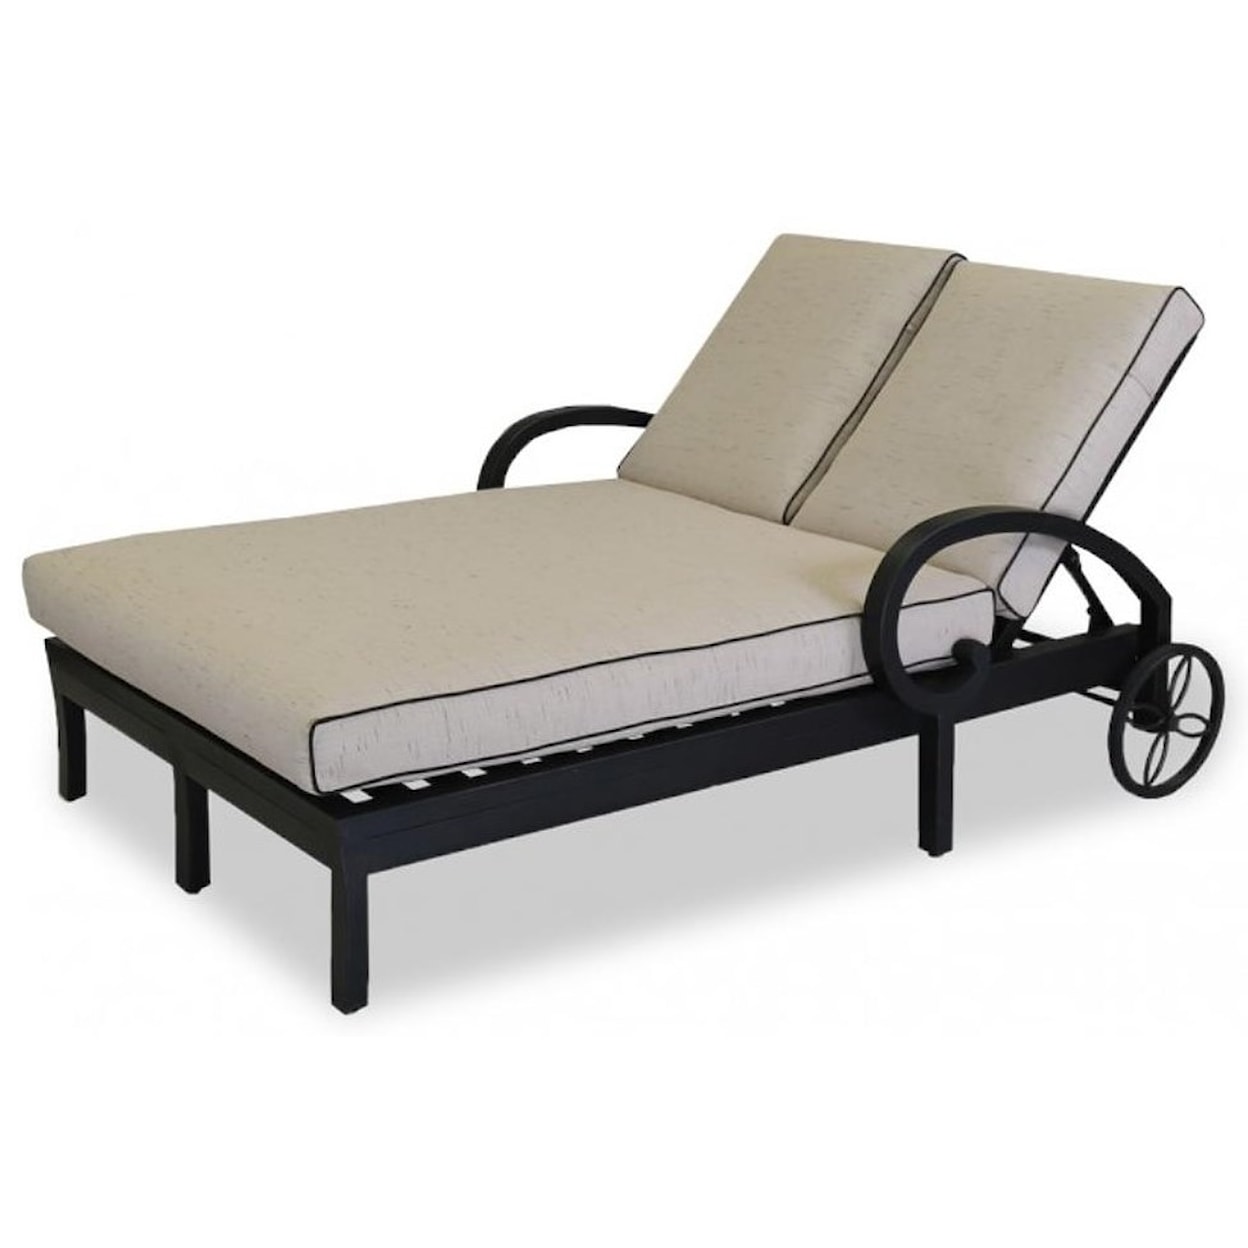 Sunset West Monterey Adjustable Double Chaise